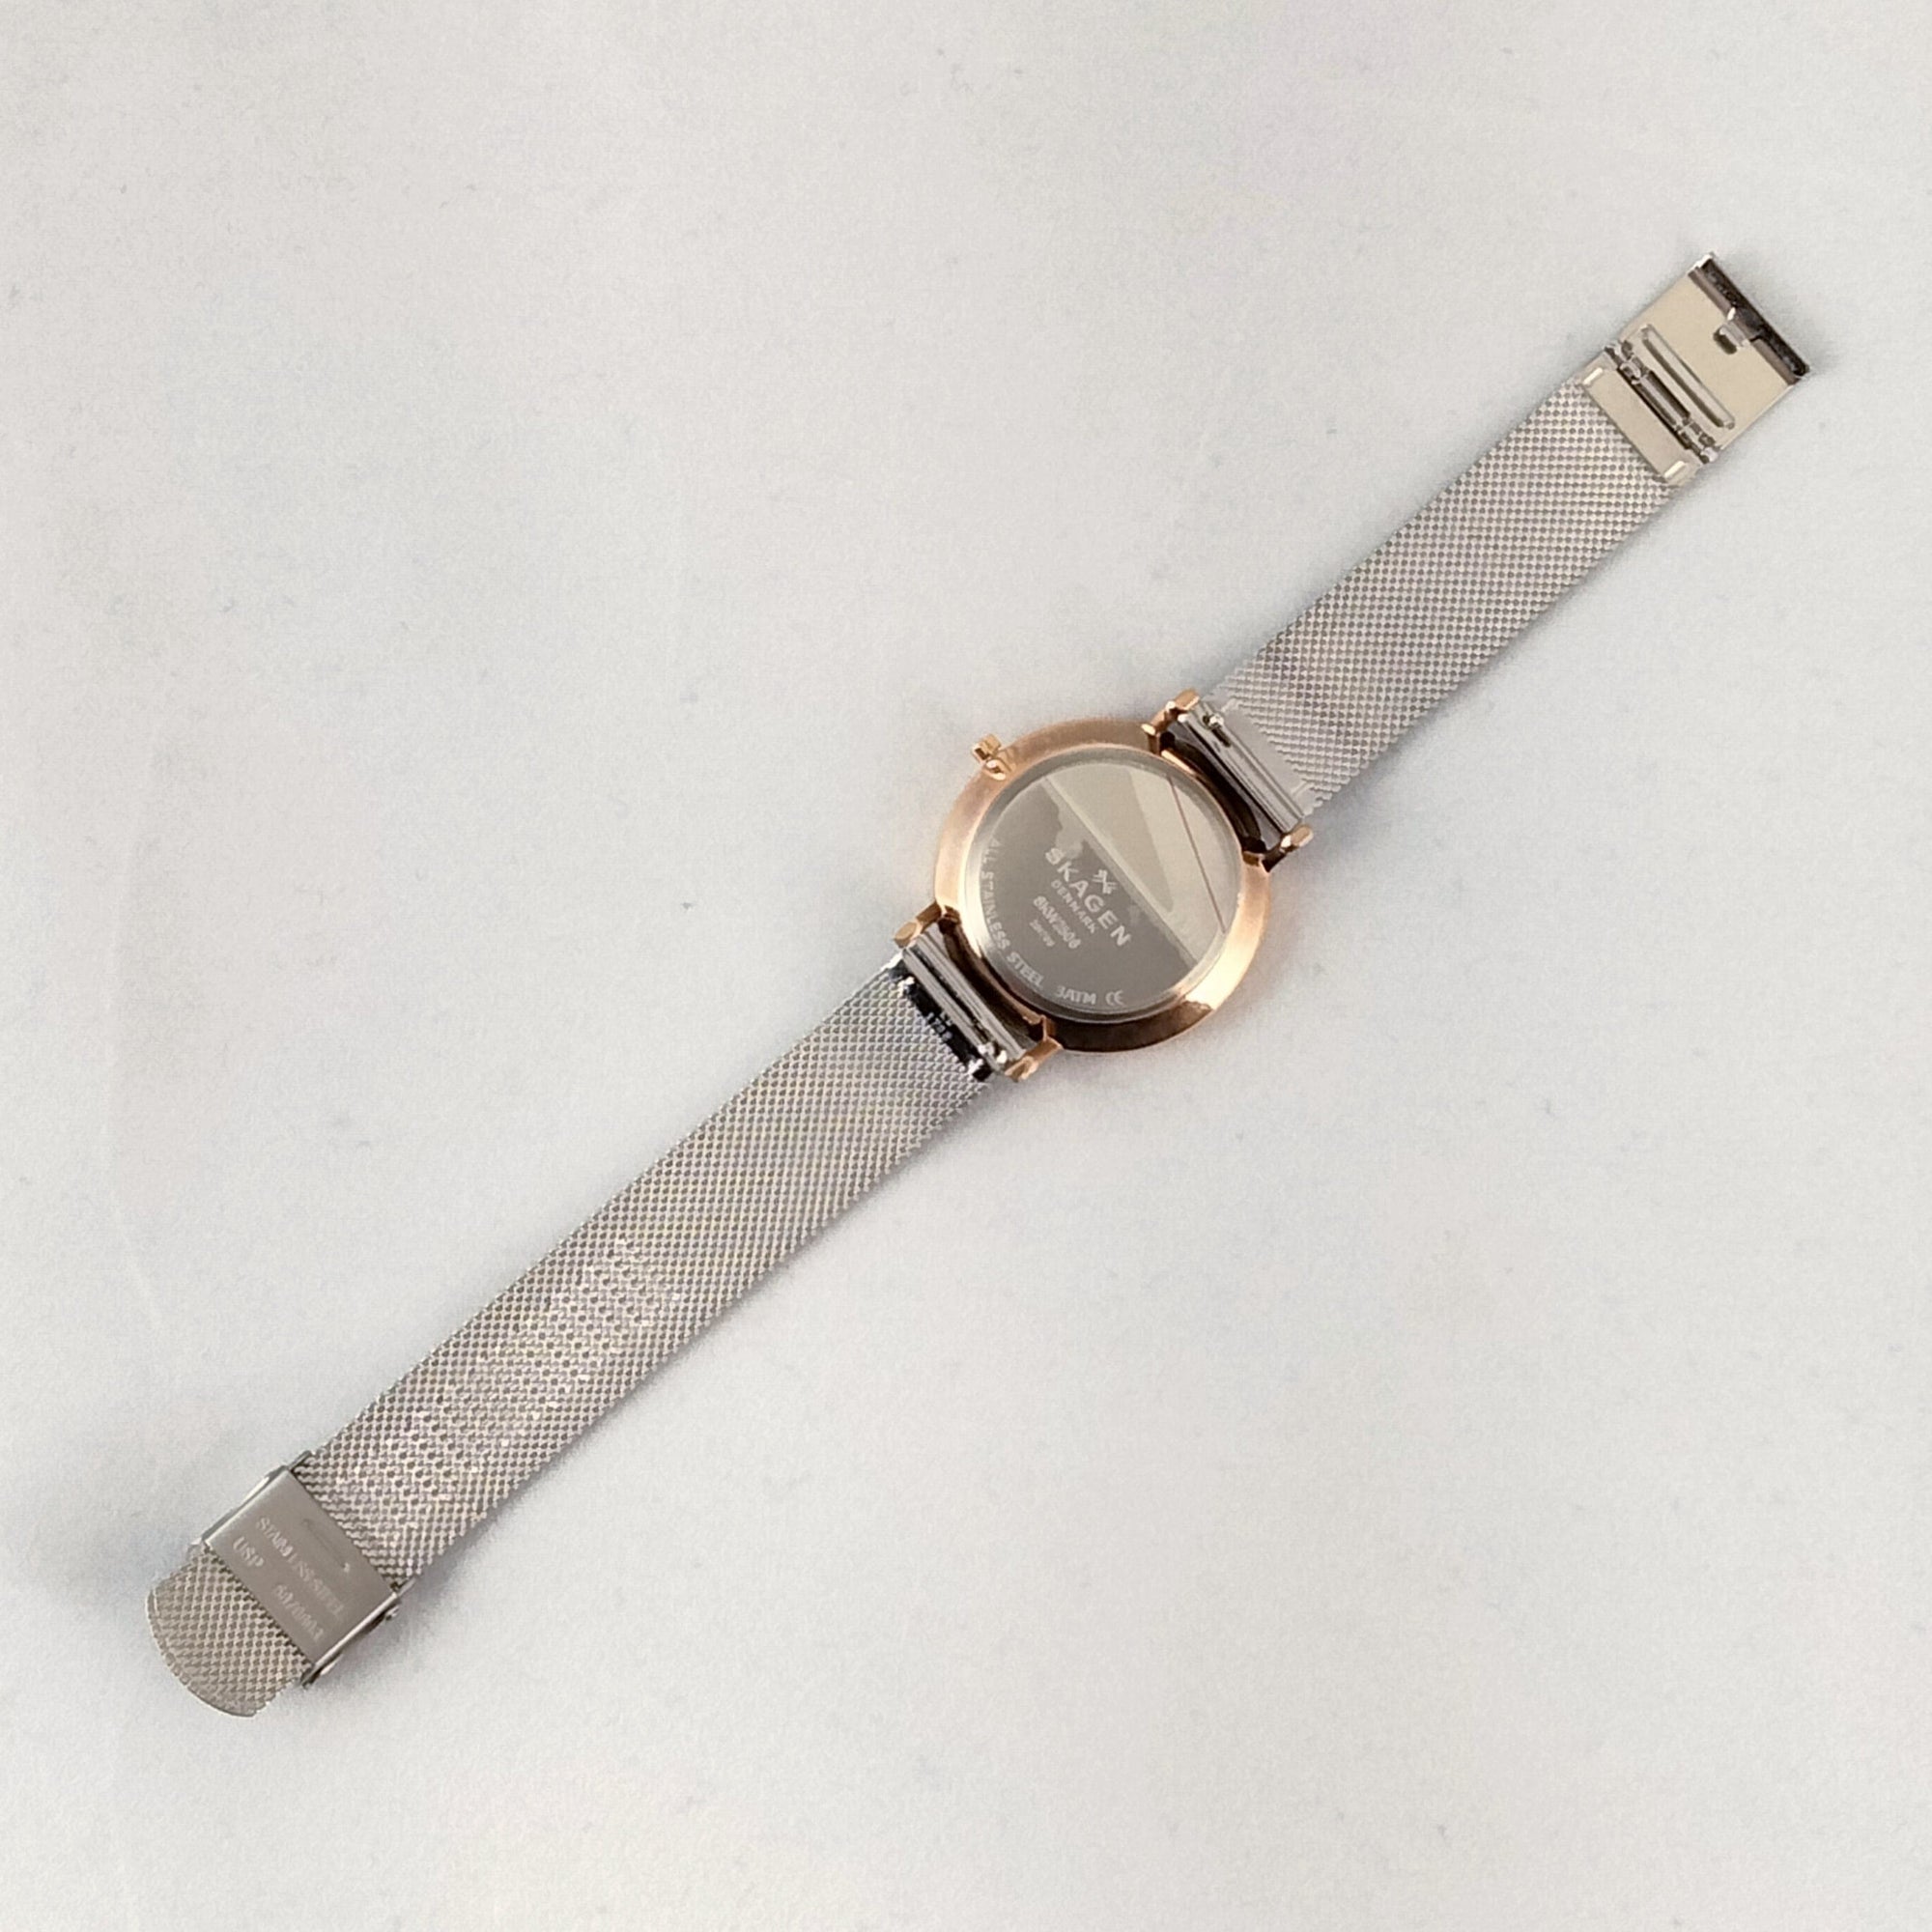 I Like Mikes Mid Century Modern Watches Skagen Women's Stainless Steel Watch, Cream Dial, Gold Tone and Jewel Details, Mesh Strap